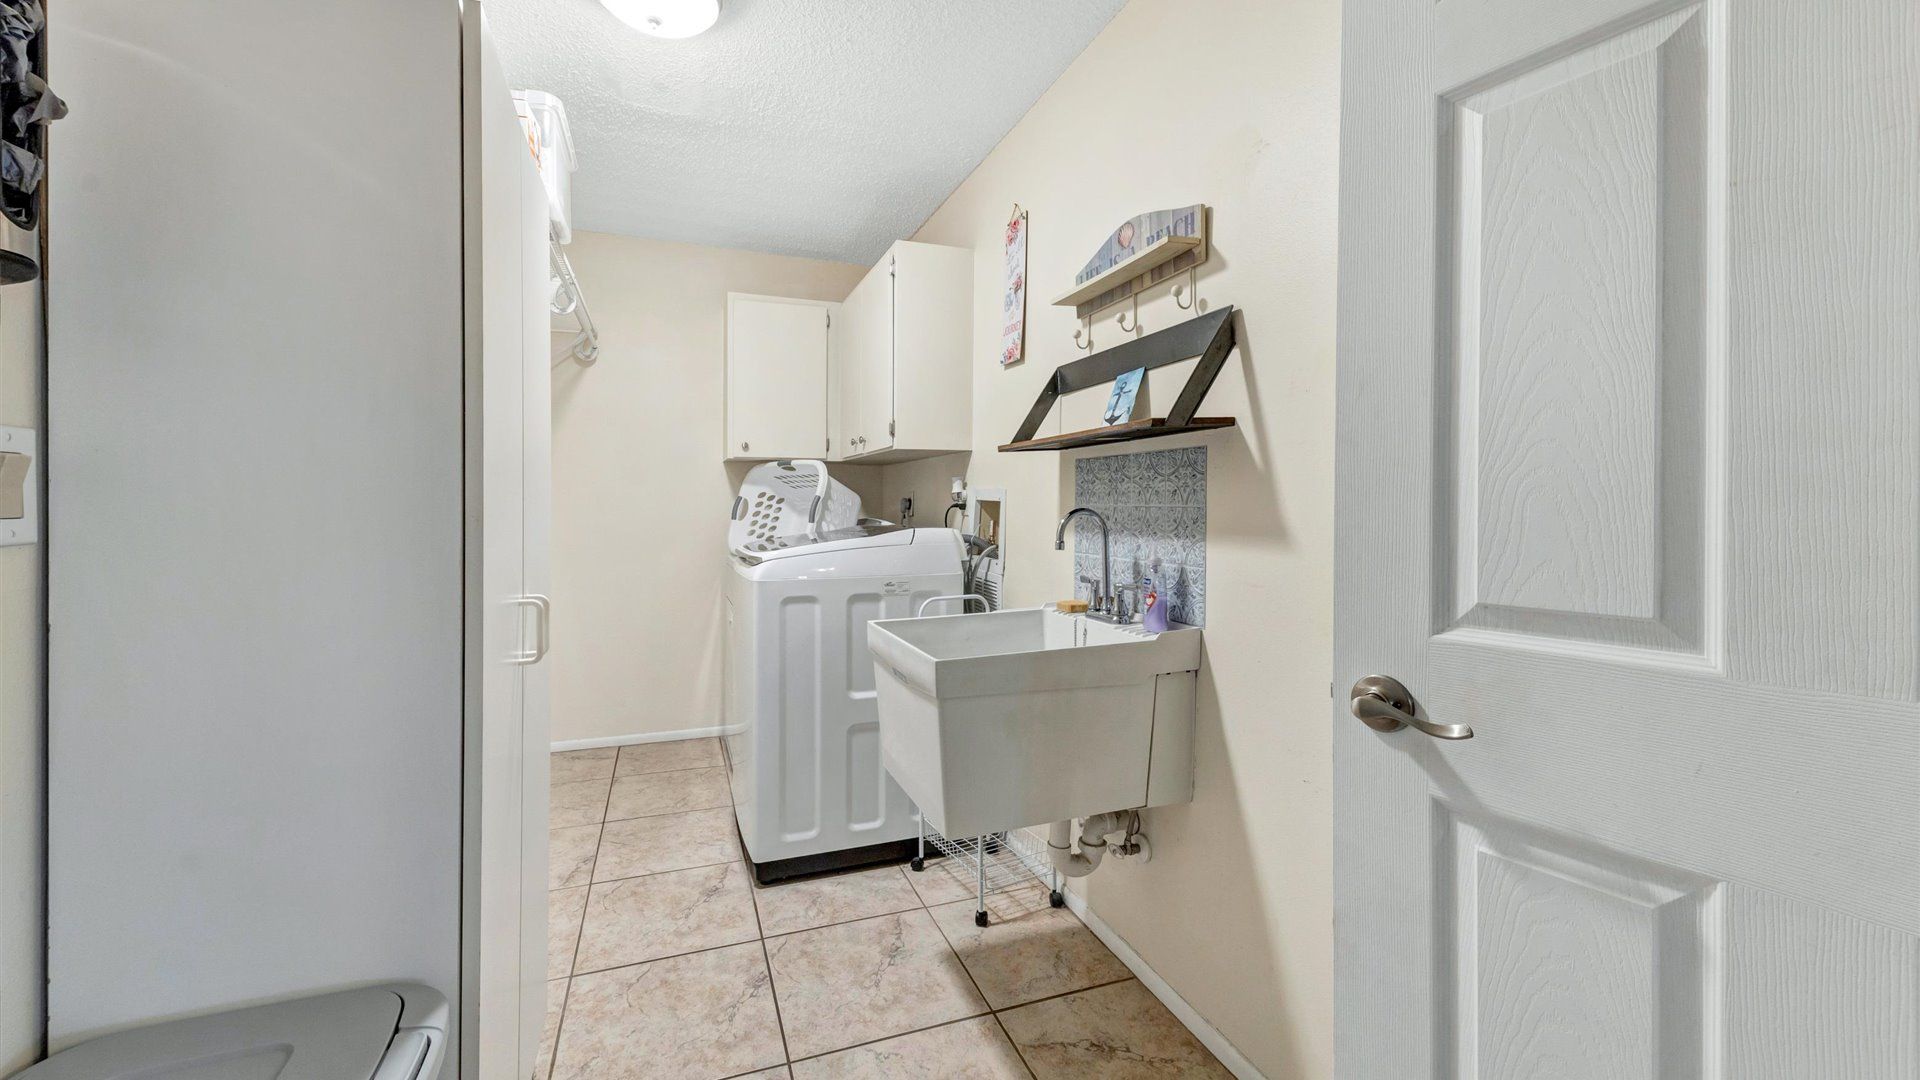 Full size washer and dryer in laundry room